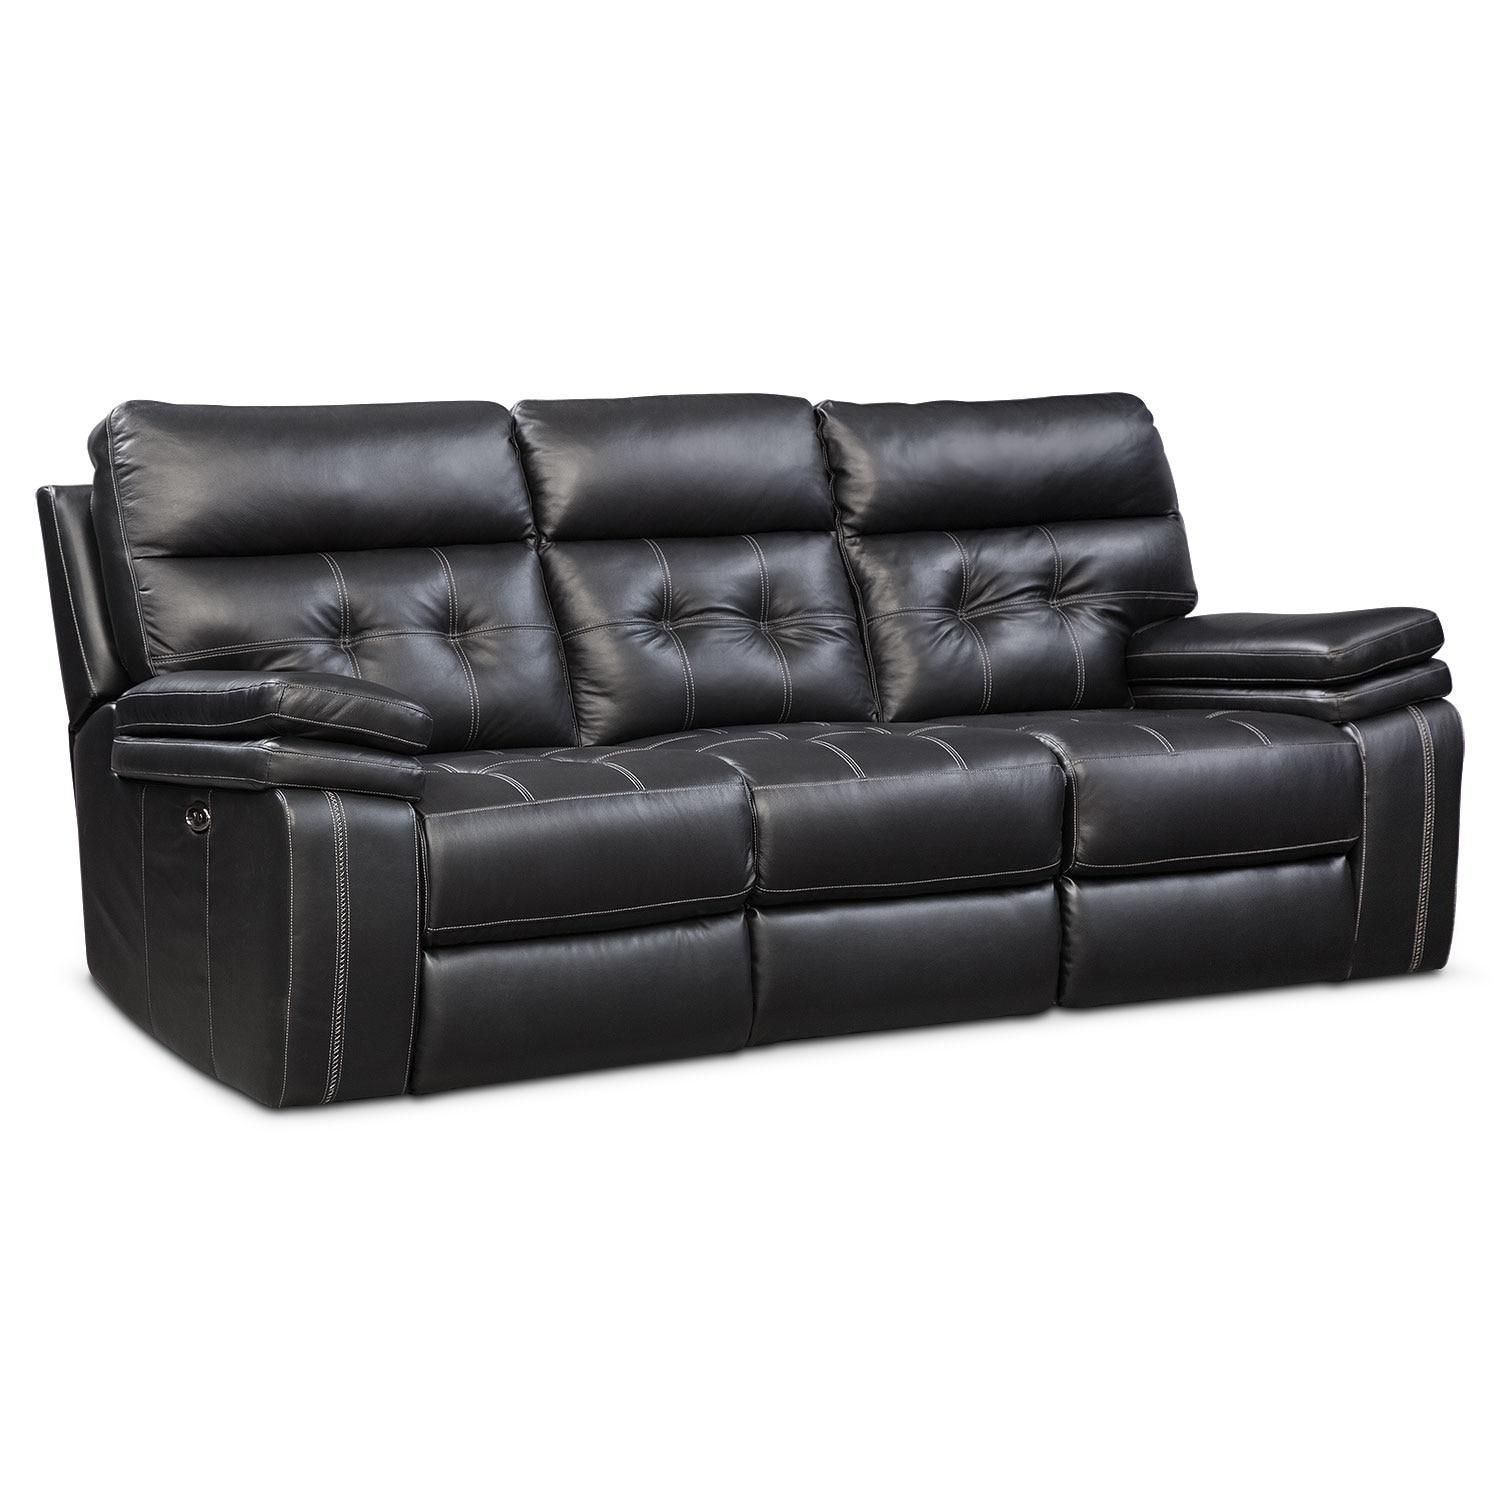 Sofas & Couches | Living Room Seating | Value City Furniture Regarding Wide Sofa Chairs (View 8 of 20)